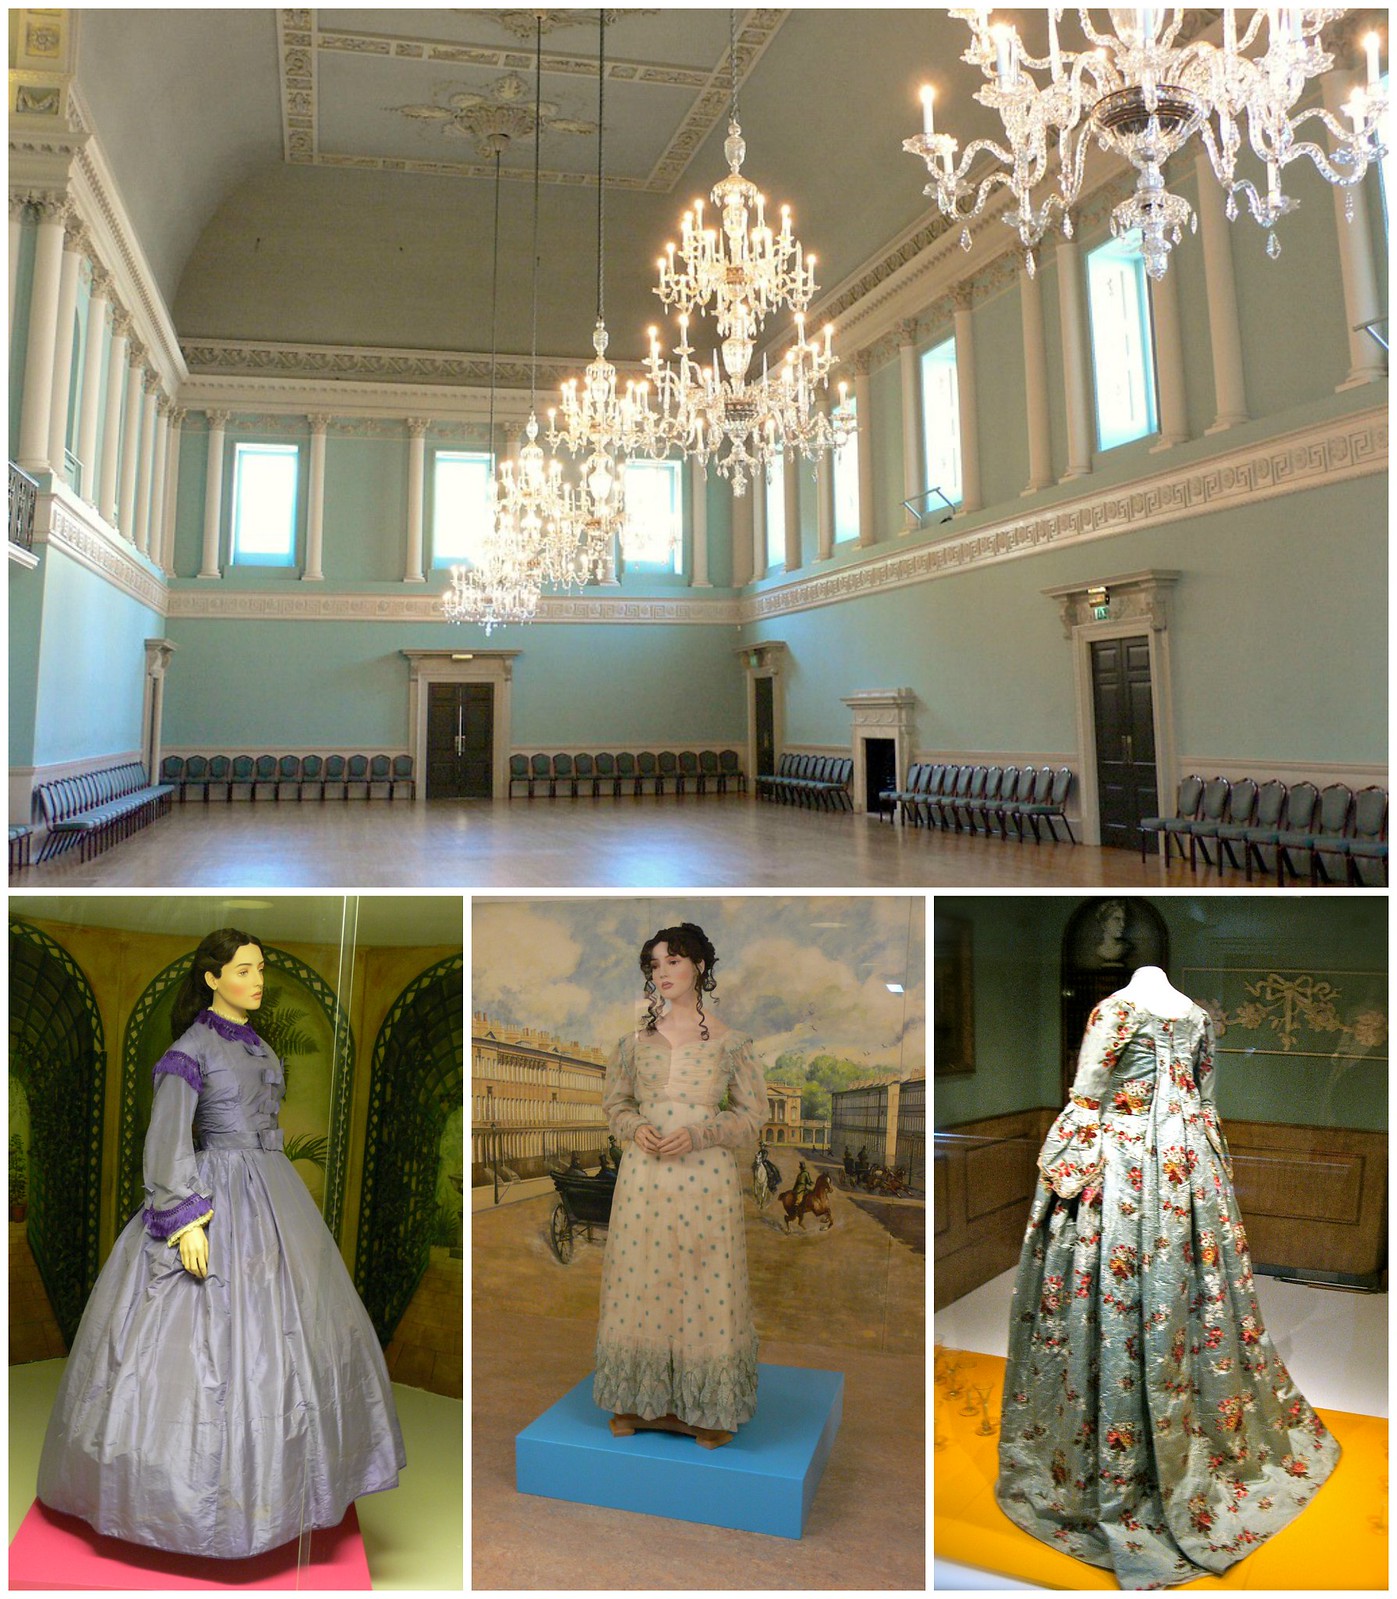 Assembly Rooms and Fashion Museum. Credit: Heather Cowper, flickr; Lisby, flickr